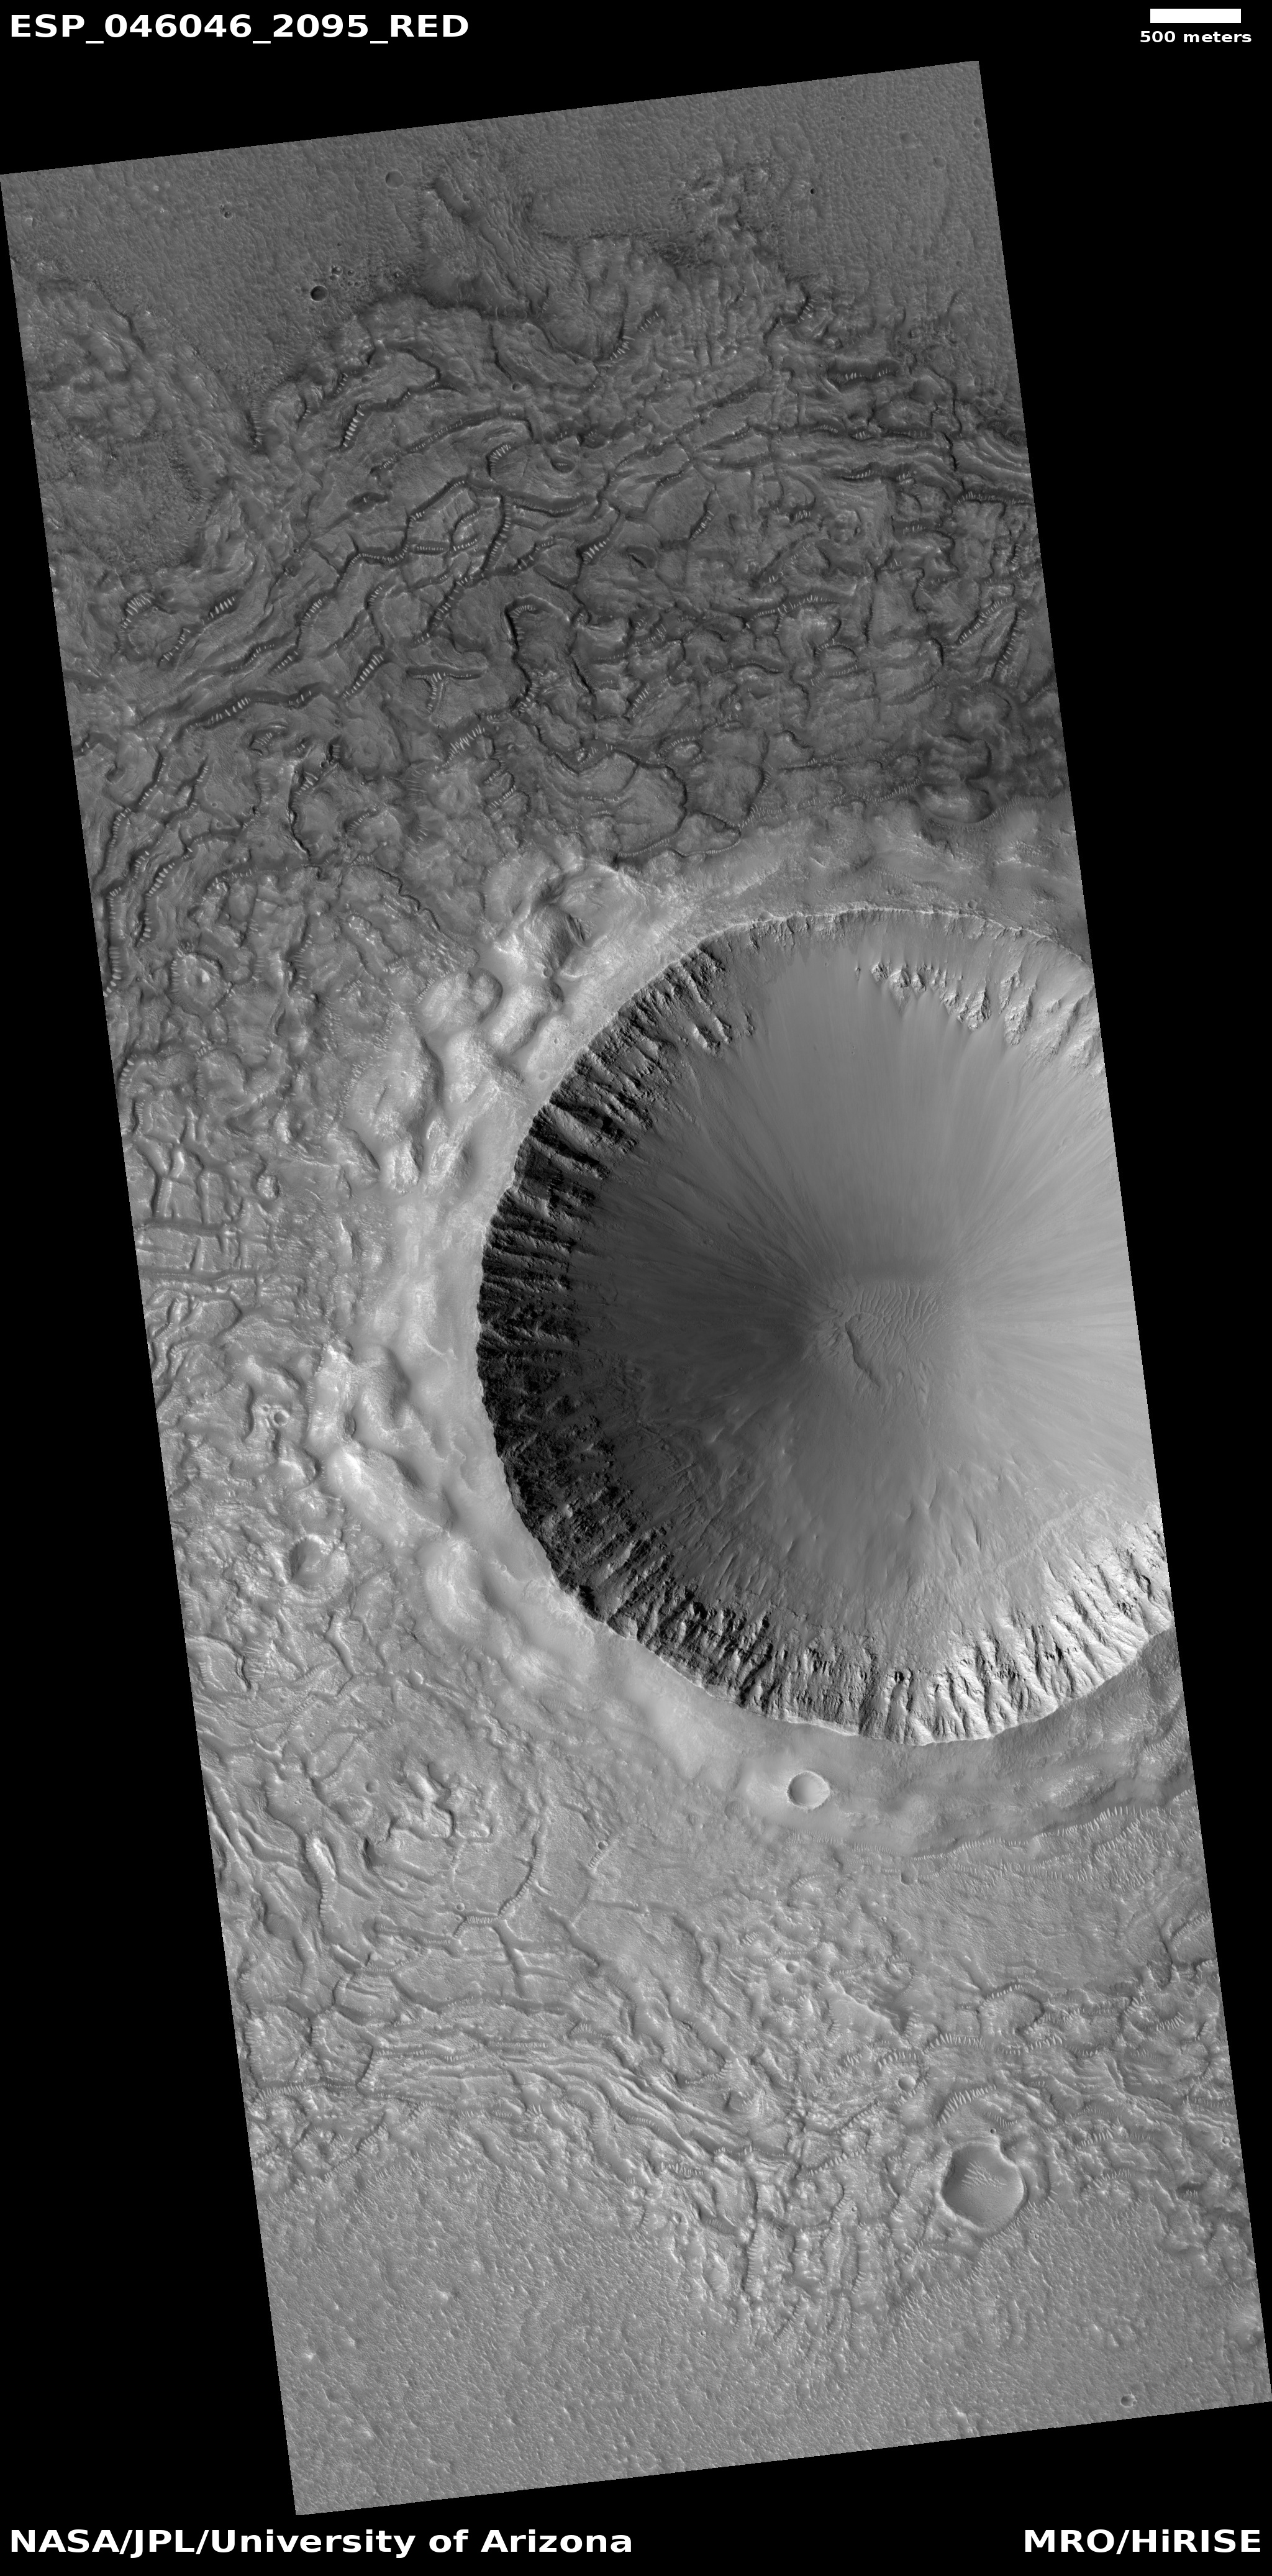 This is a fairly young crater as it still shows ejecta, layers, and a rim.